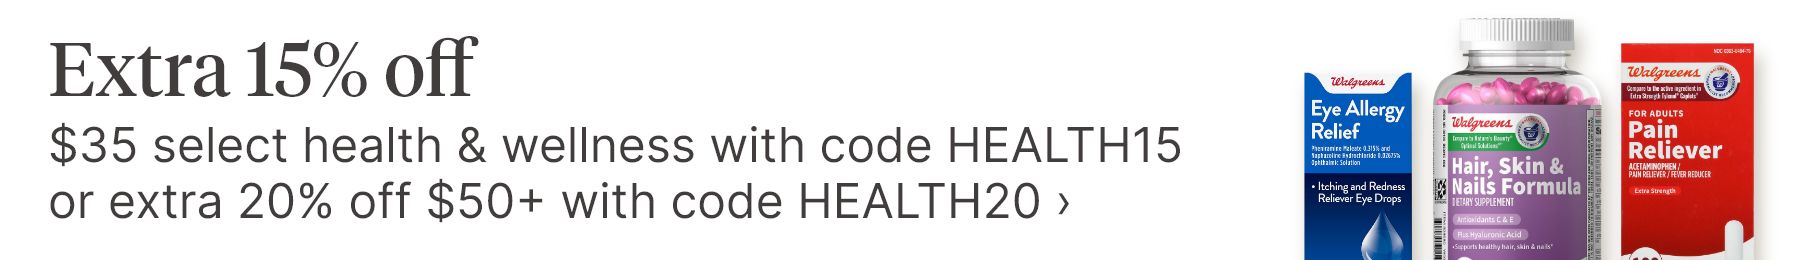 Extra 15% off $35 select health & wellness with code HEALTH15 or extra 20% off $50+ with code HEALTH20.